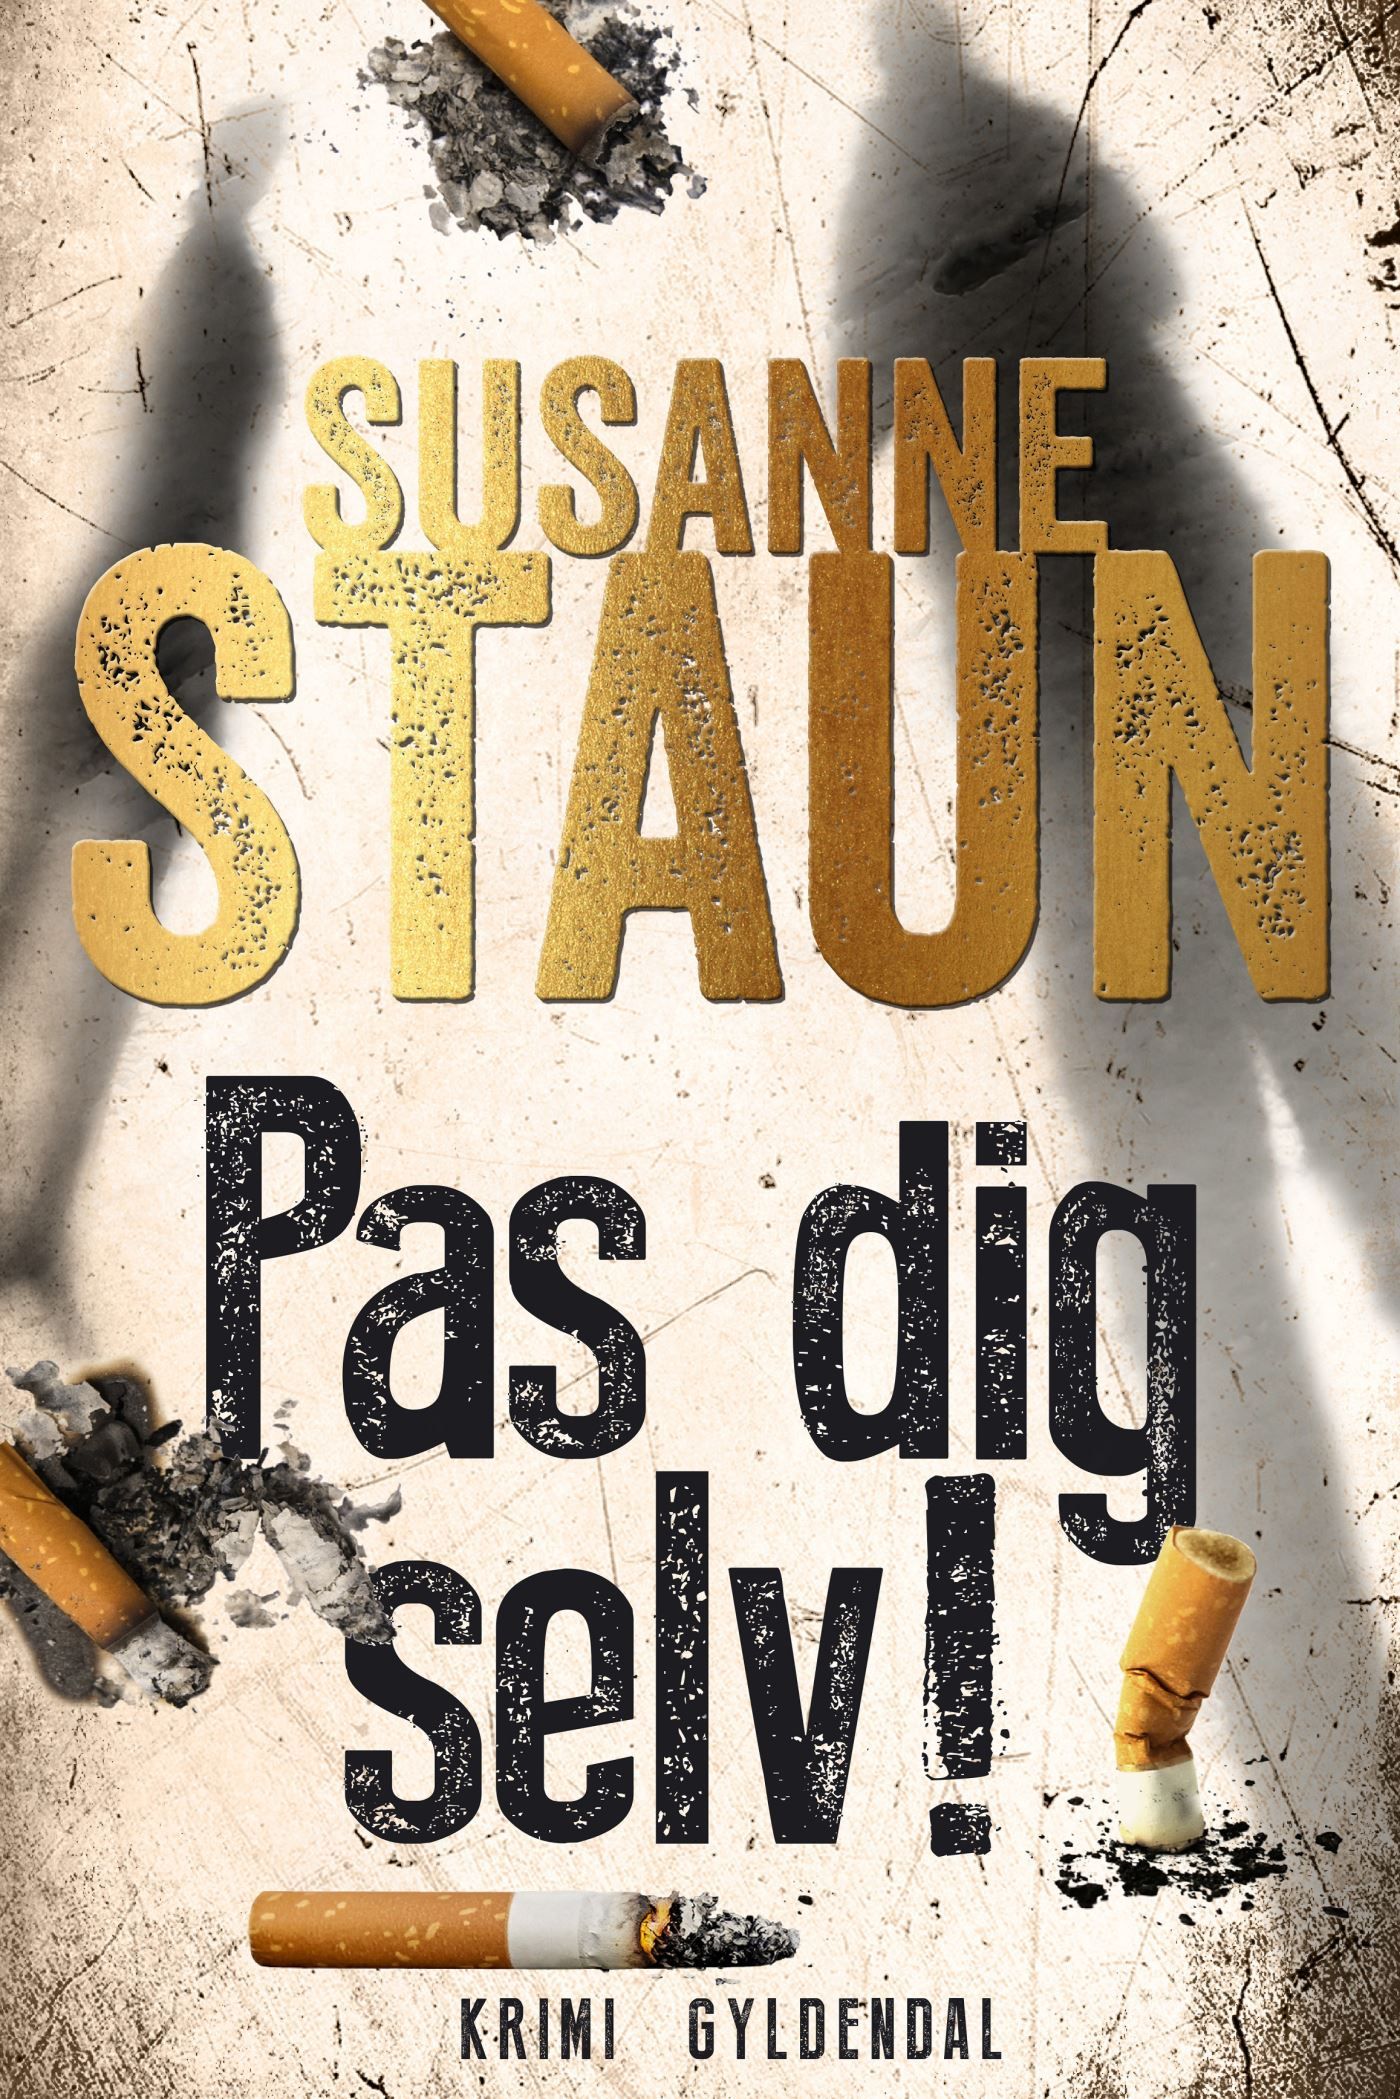 Pas dig selv!, audiobook by Susanne Staun